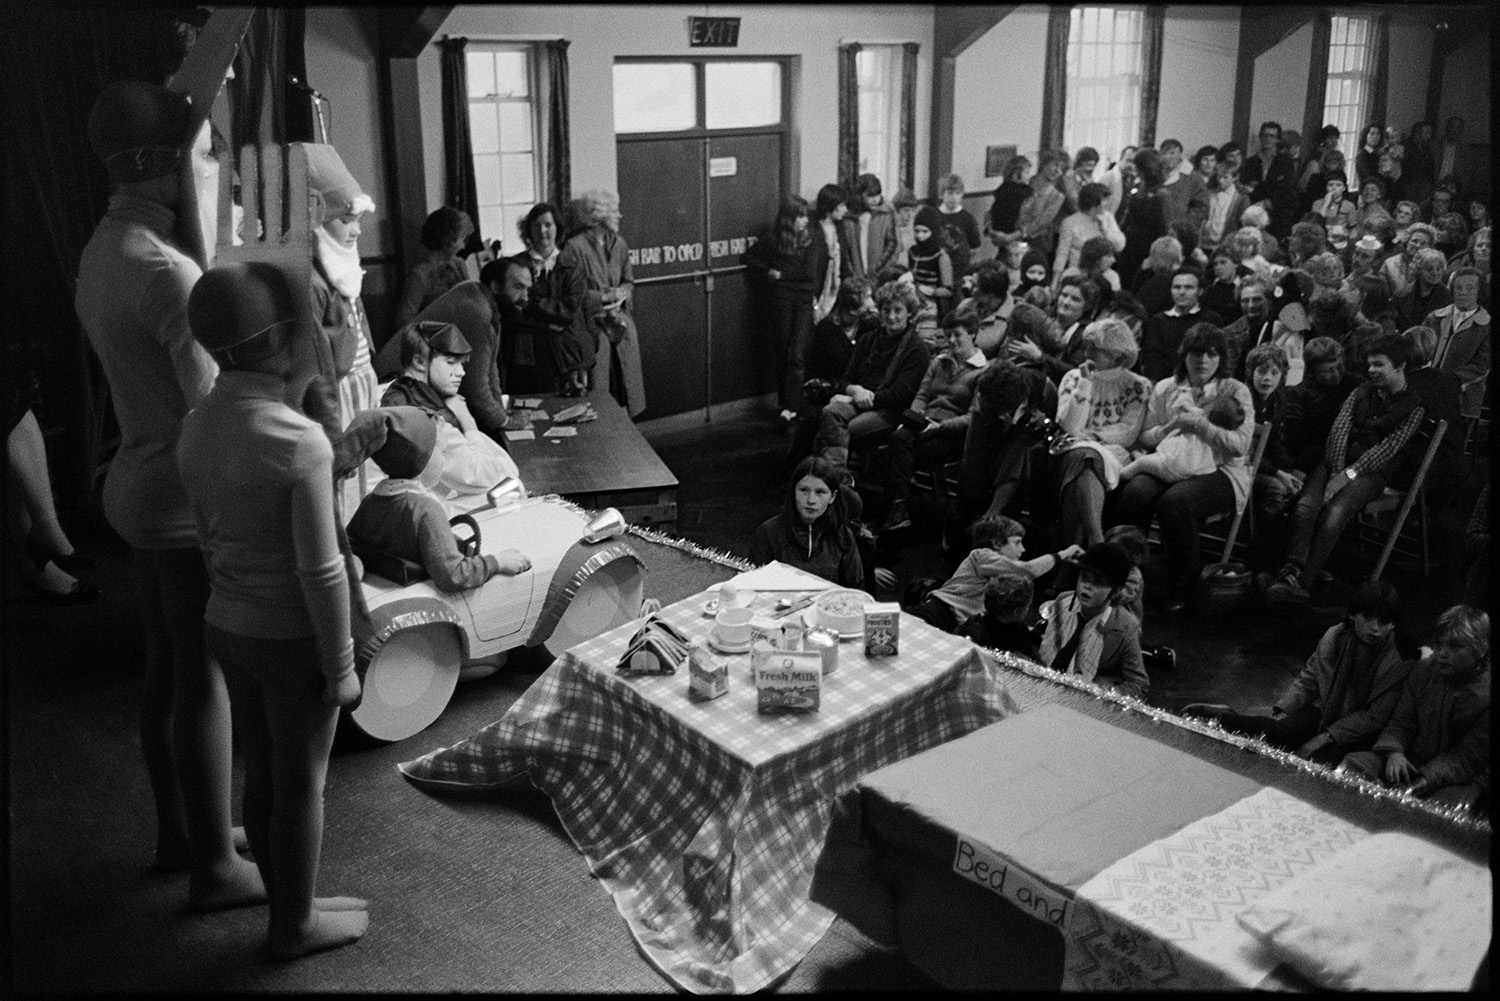 Fancy dress competition in village hall, children's King and Queen on stage. 
[A crowd of people in Dolton Village Hall watching a children's fancy dress parade for Dolton Carnival. One child is dressed as Noddy. A model bed and table laid with breakfast is also on the stage.]